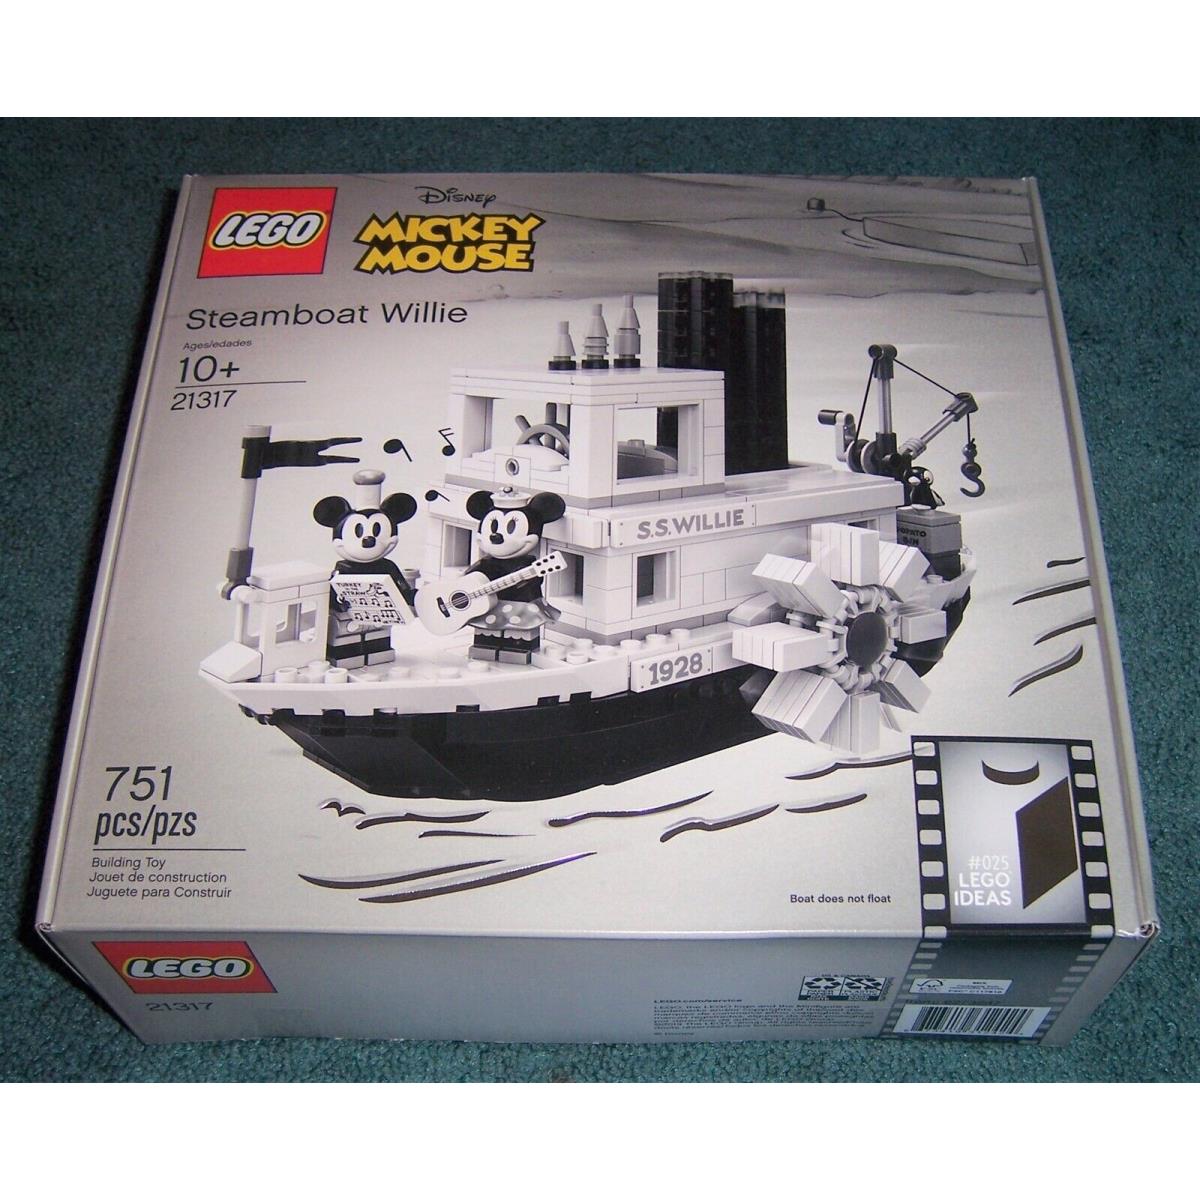 Lego Disney Ideas Steamboat Willie 21317 Set Mickey Mouse Minnie Boat